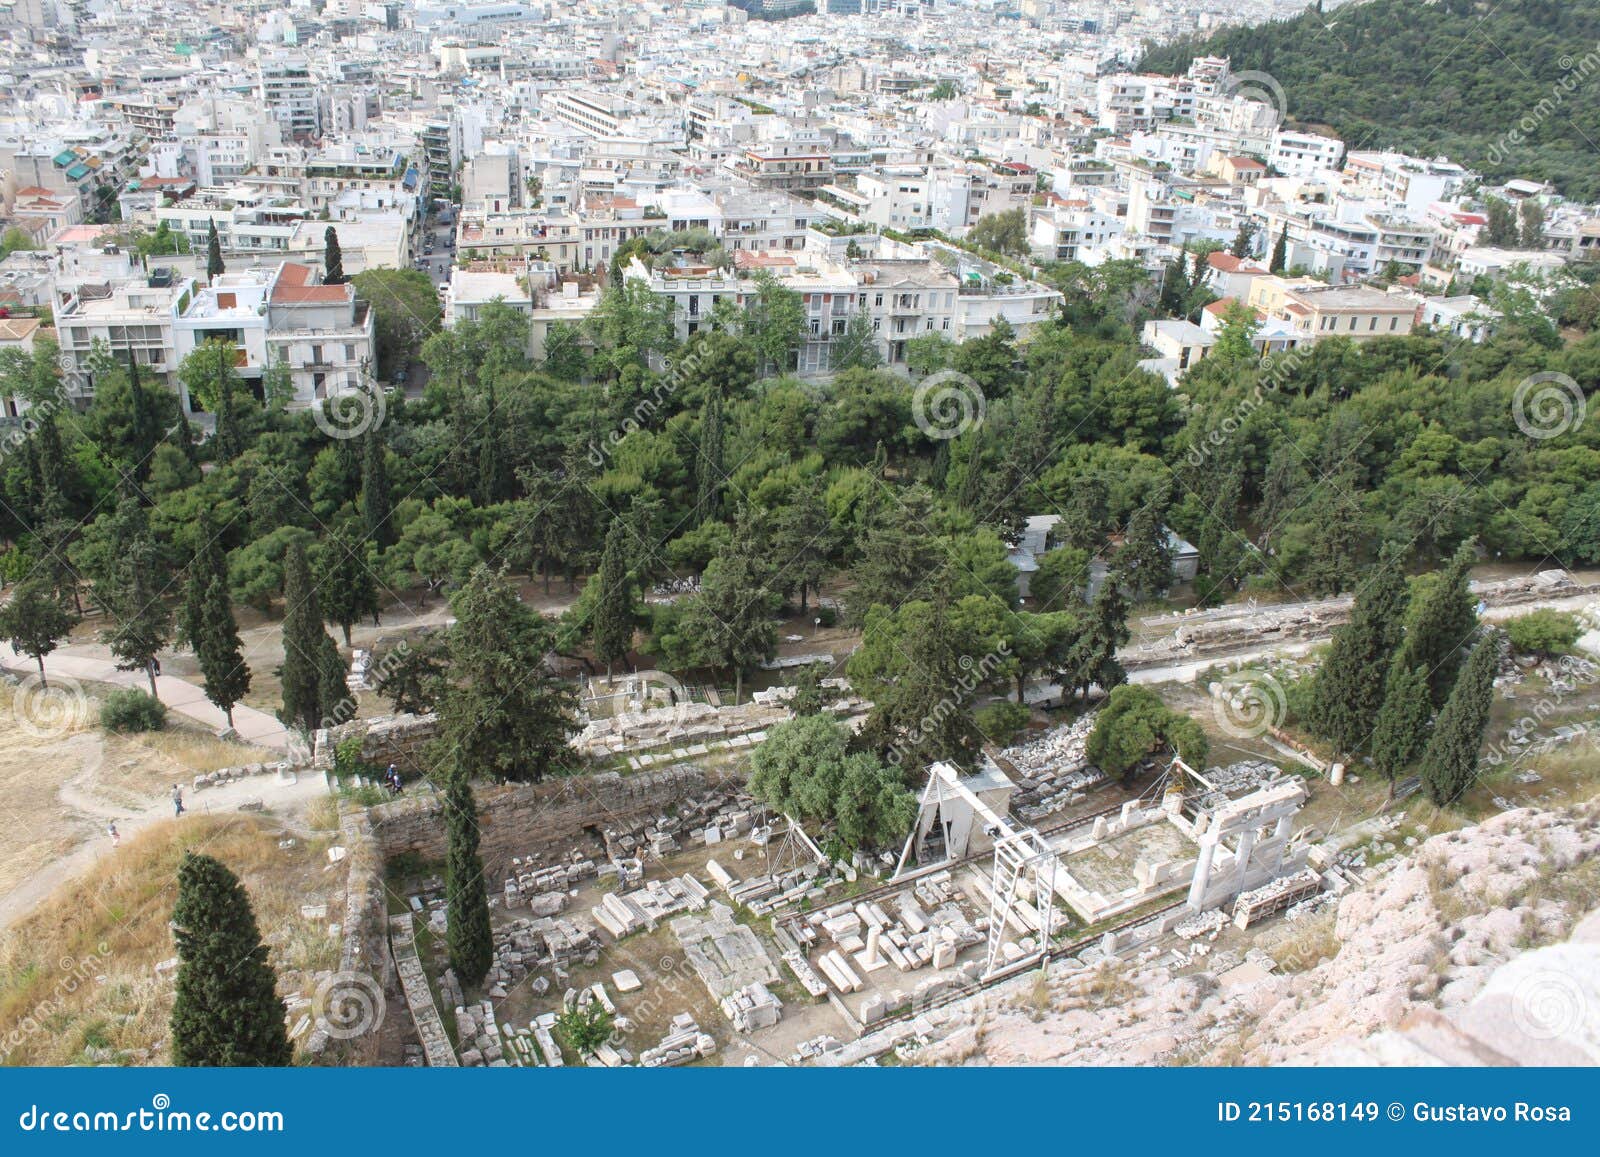 aerial view of the partenon ruins, athens, greece